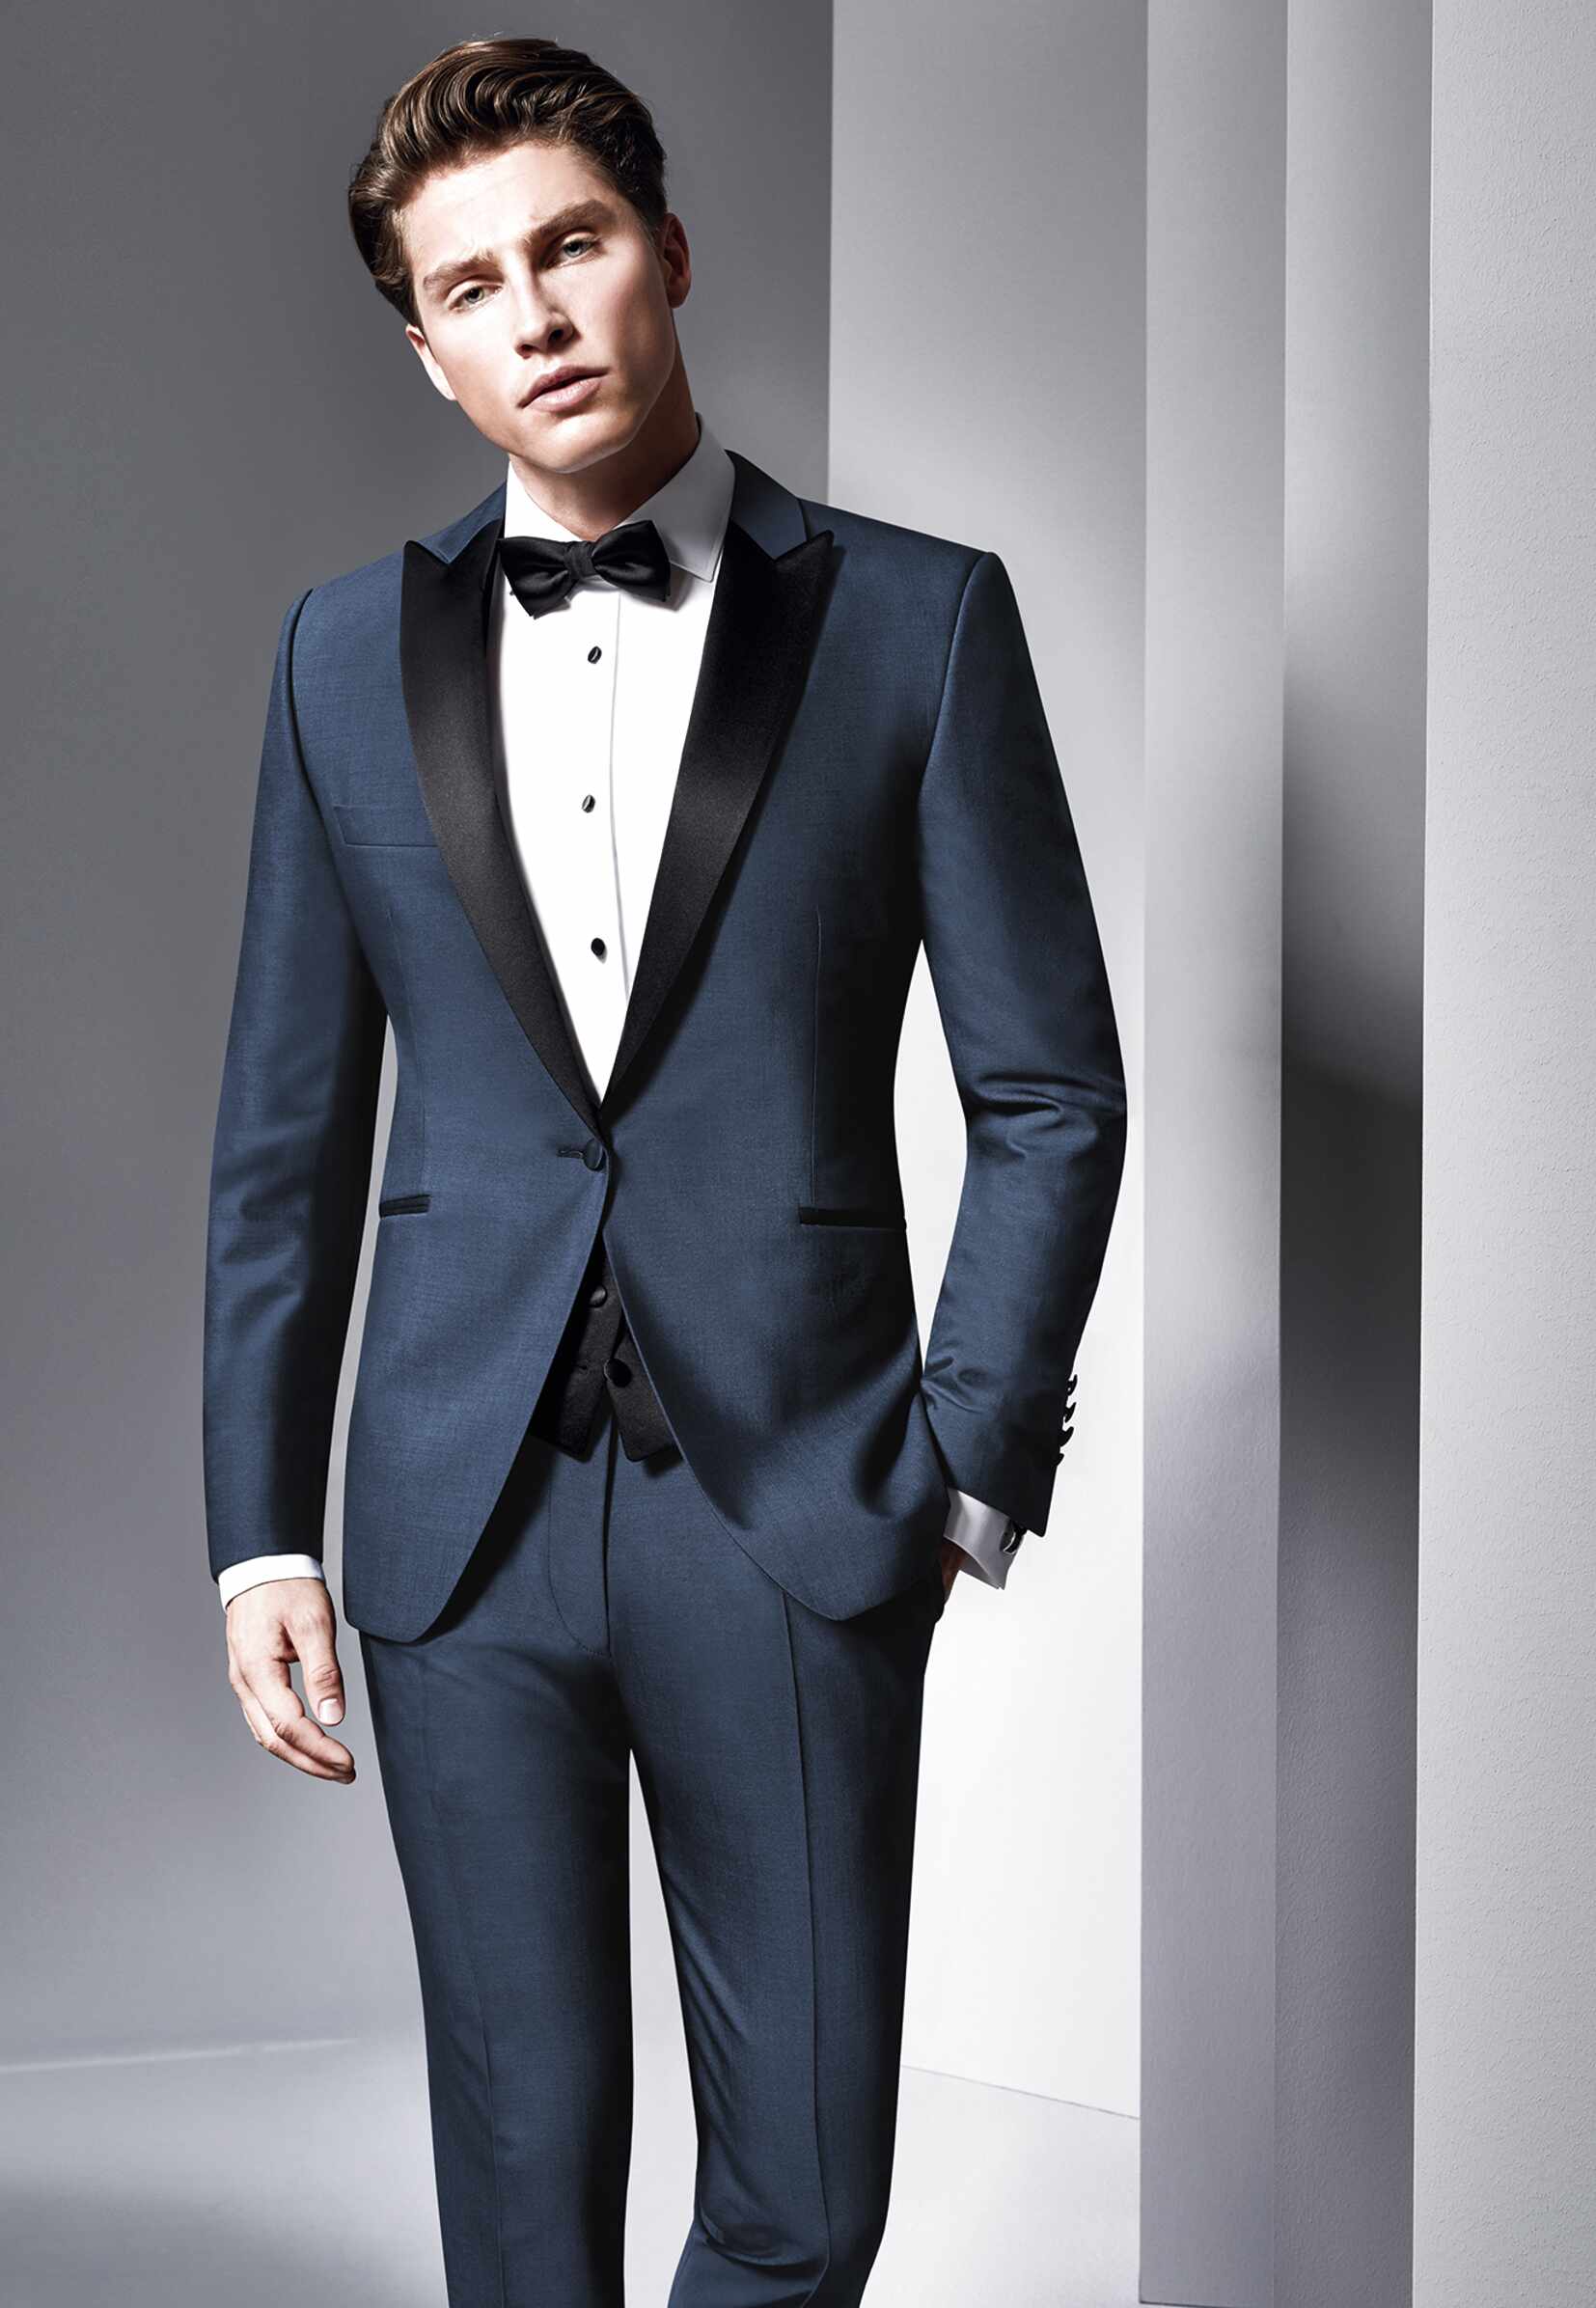 Tuxedo Suit for sale in UK | 91 second-hand Tuxedo Suits